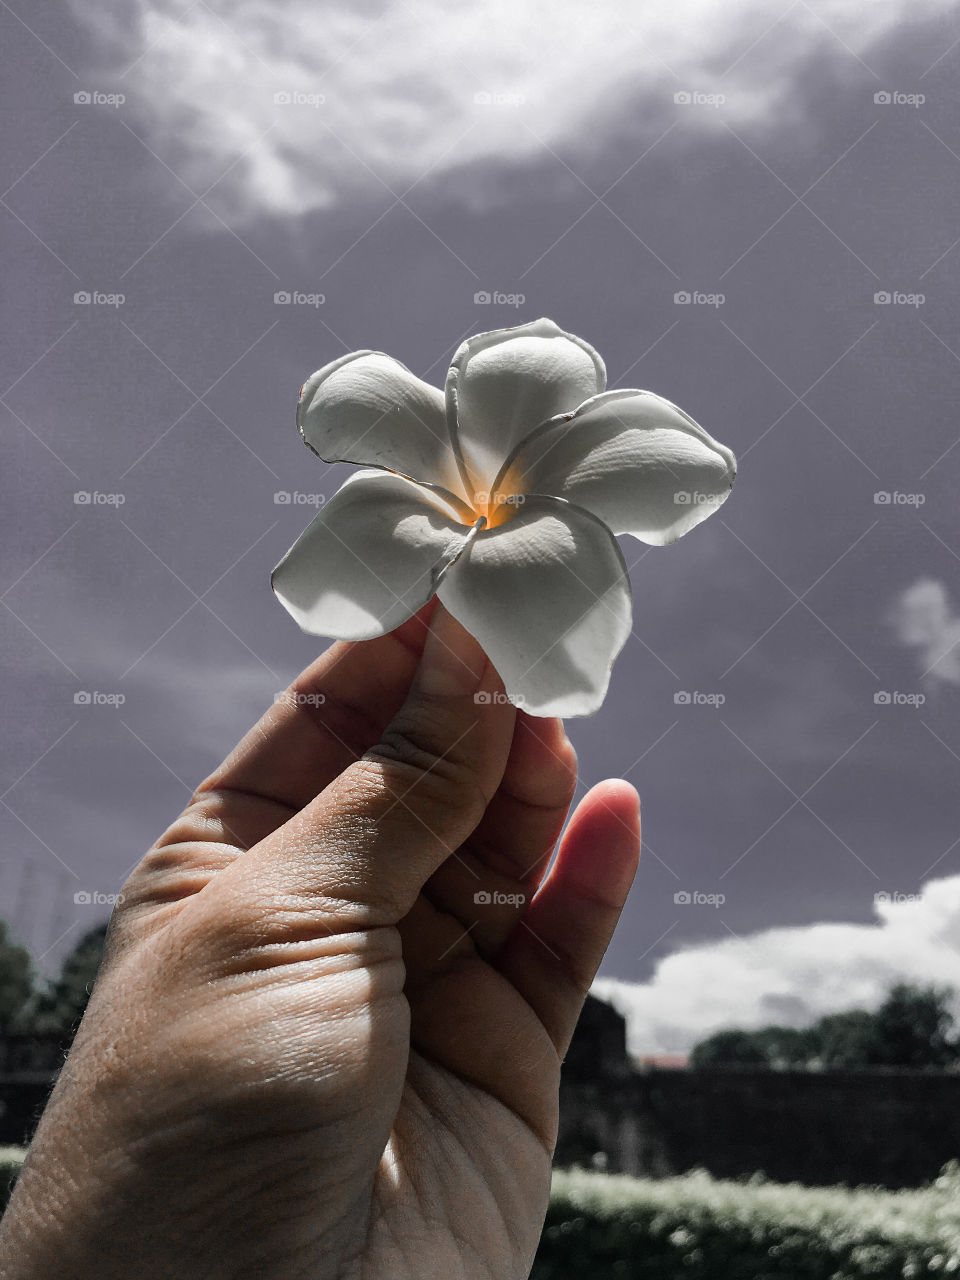 Frangipani Flower From Philippines